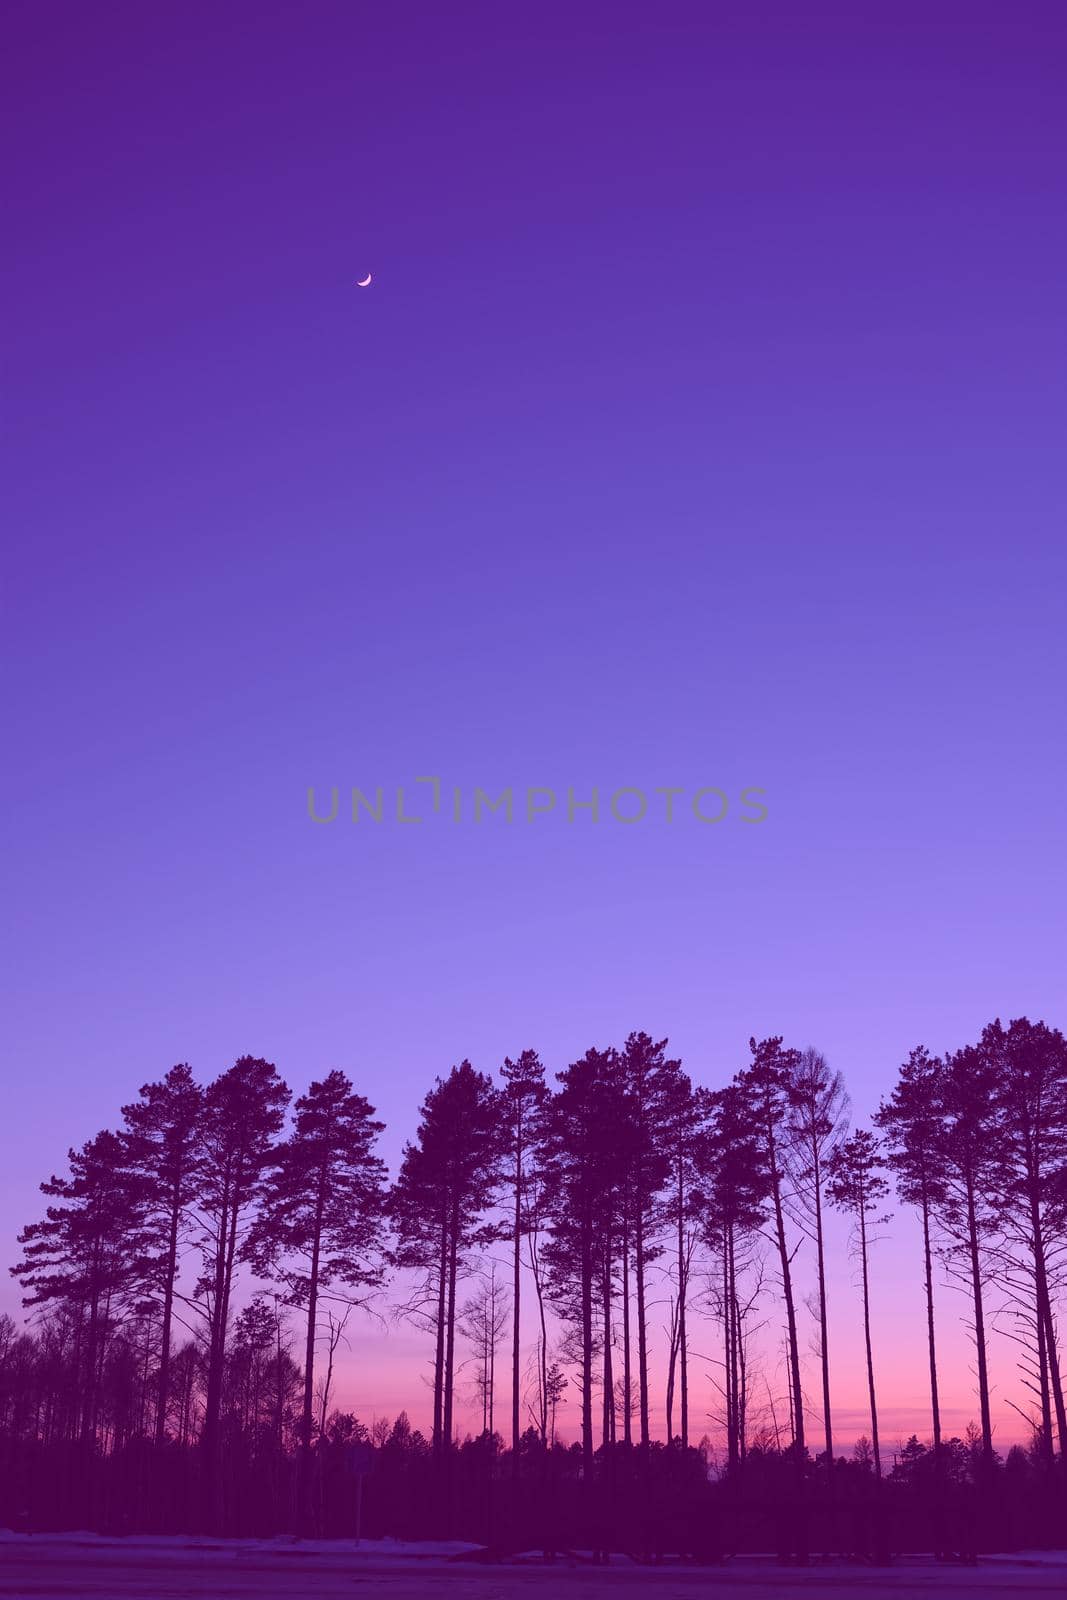 Natural forest horizon with silhouettes of trees. Evening Sunrise and sunset. landscape wallpaper. Illustration style. Colorful view background velvet violet. Vertical by Proxima13